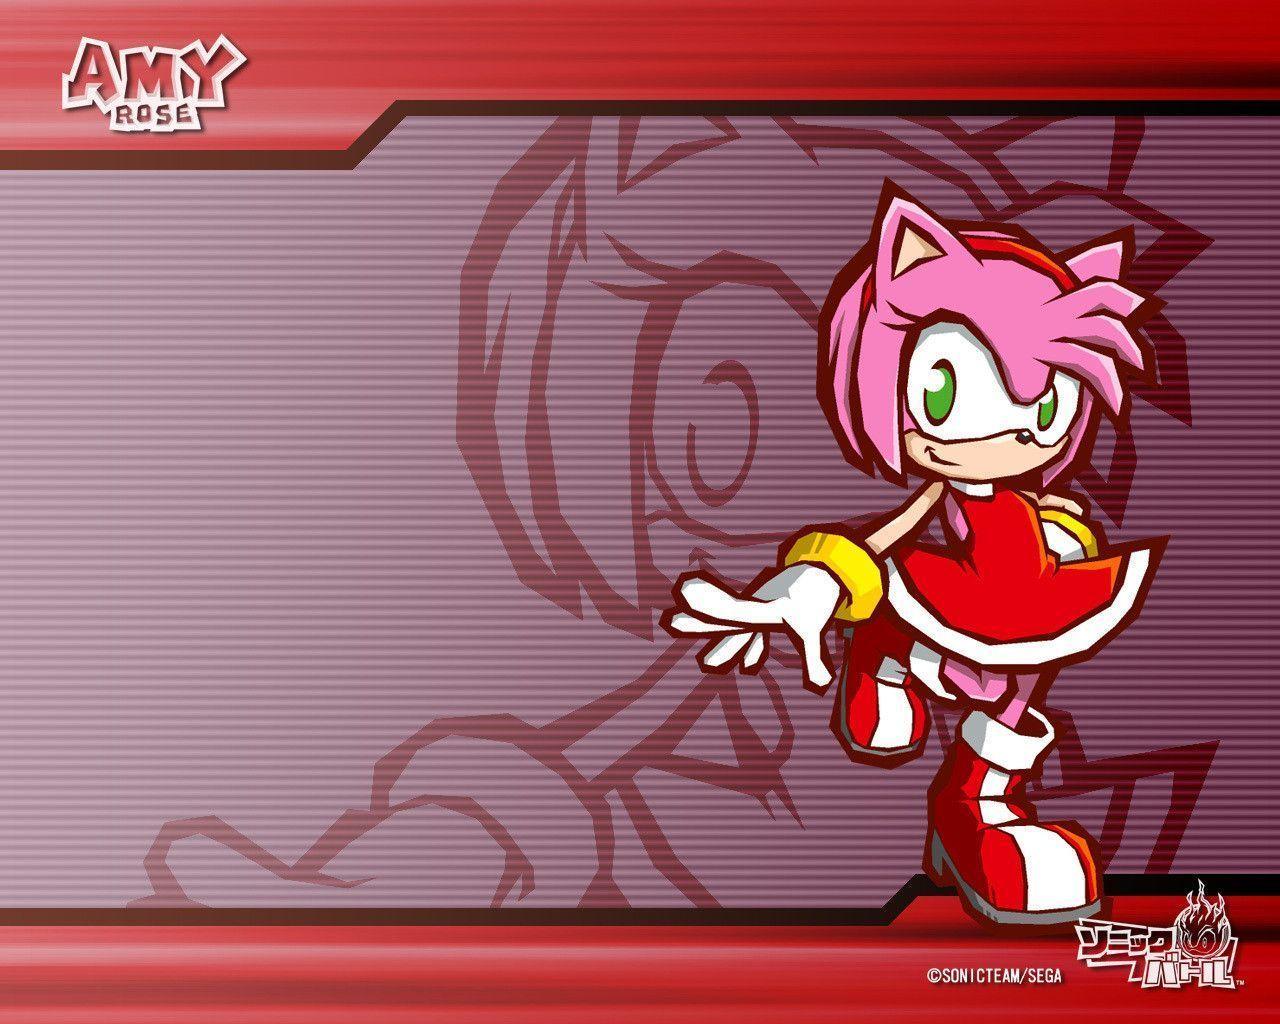 HD wallpaper Sonic Sonic the Hedgehog Amy Rose pink color  representation  Wallpaper Flare